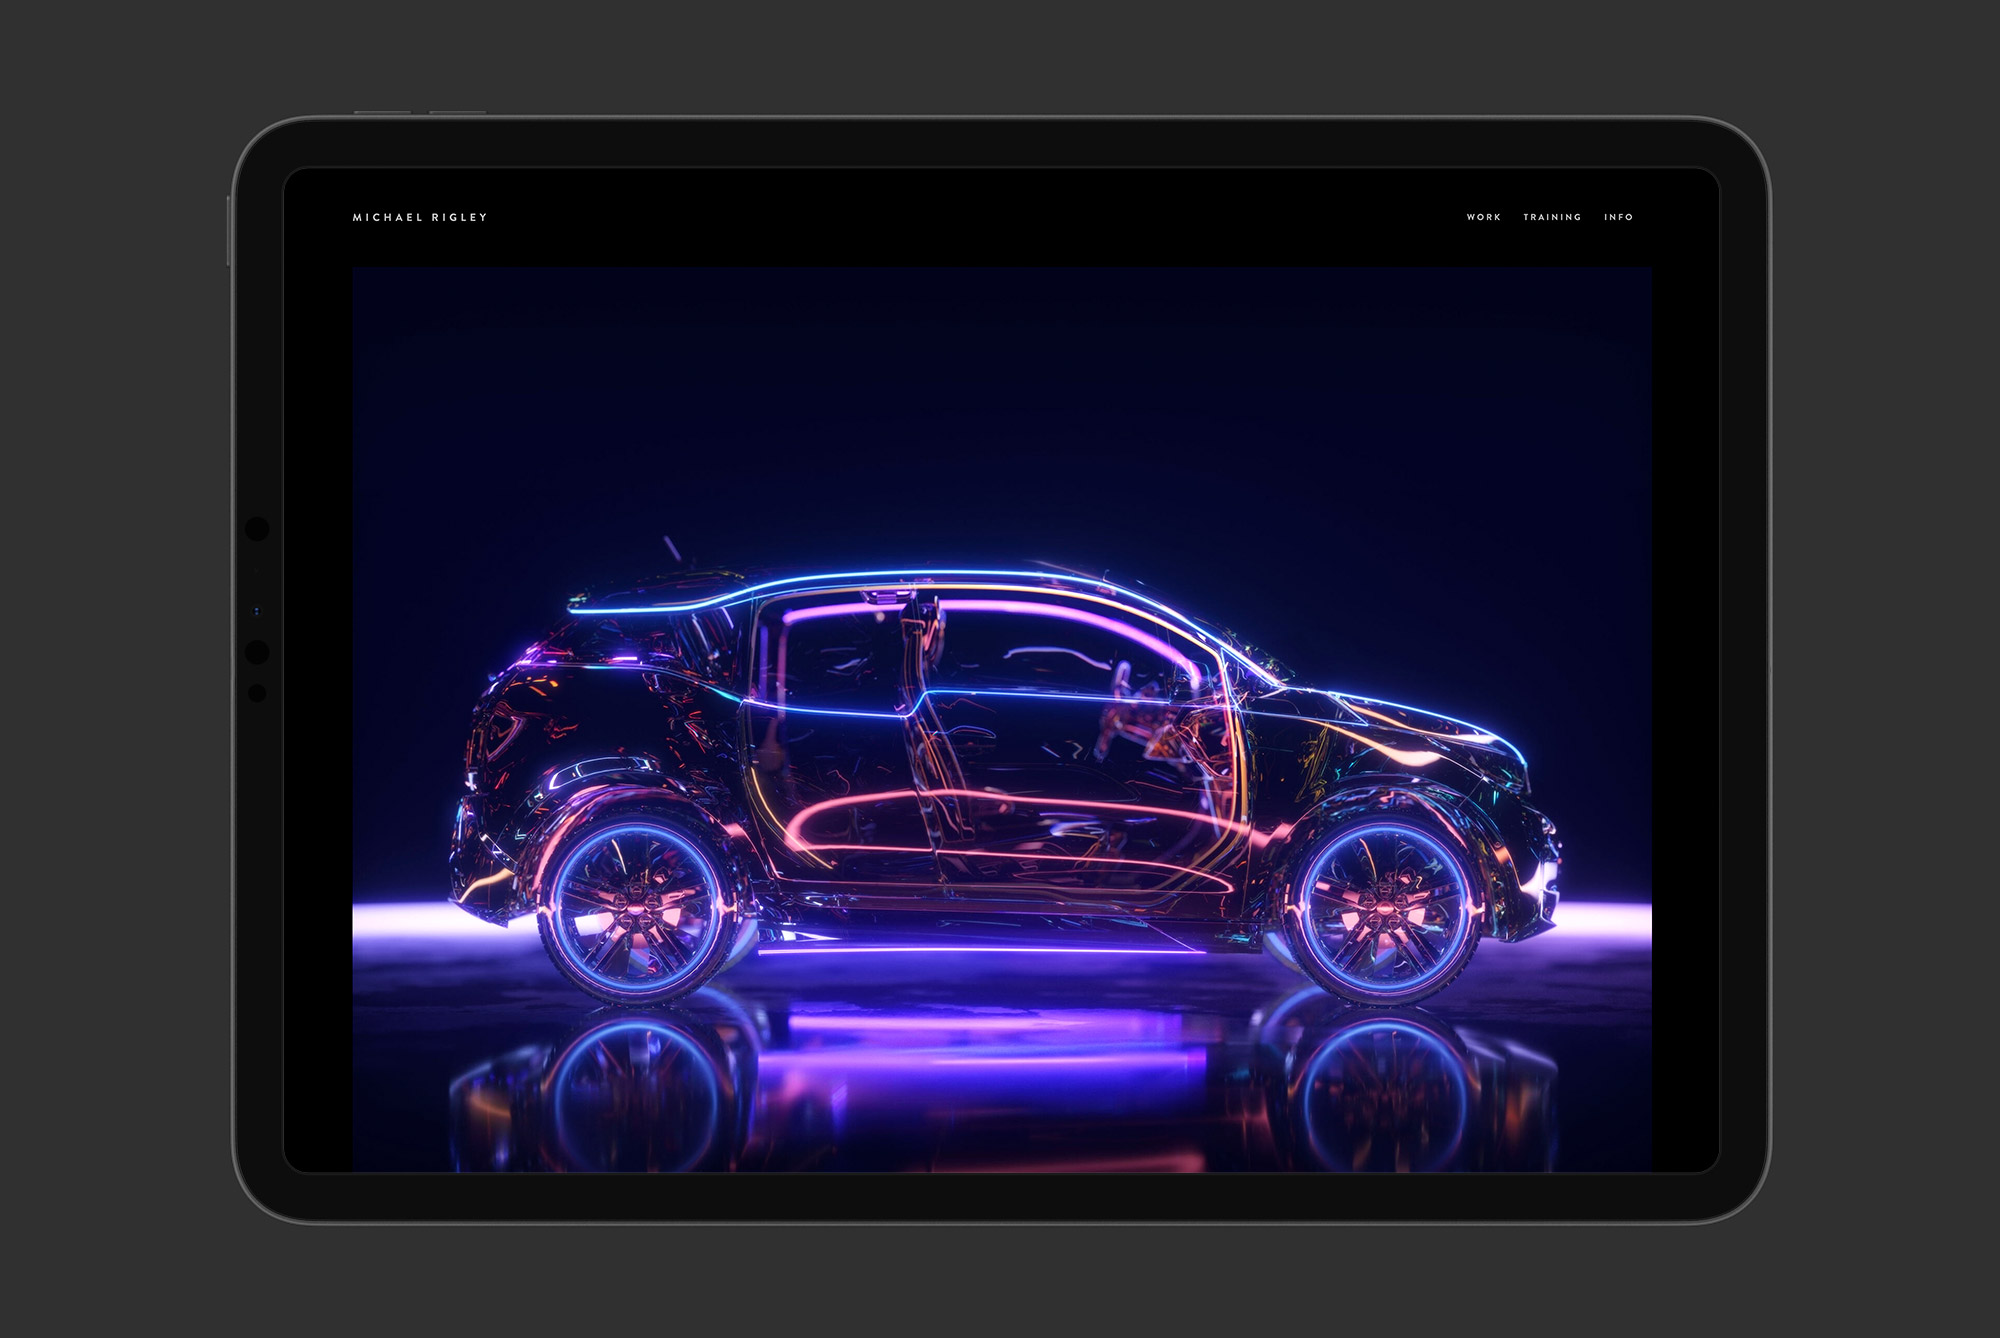 ALT: Digital mockup of a futuristic car with neon lighting effects displayed on a tablet screen, ideal for design presentations in vehicle graphics.